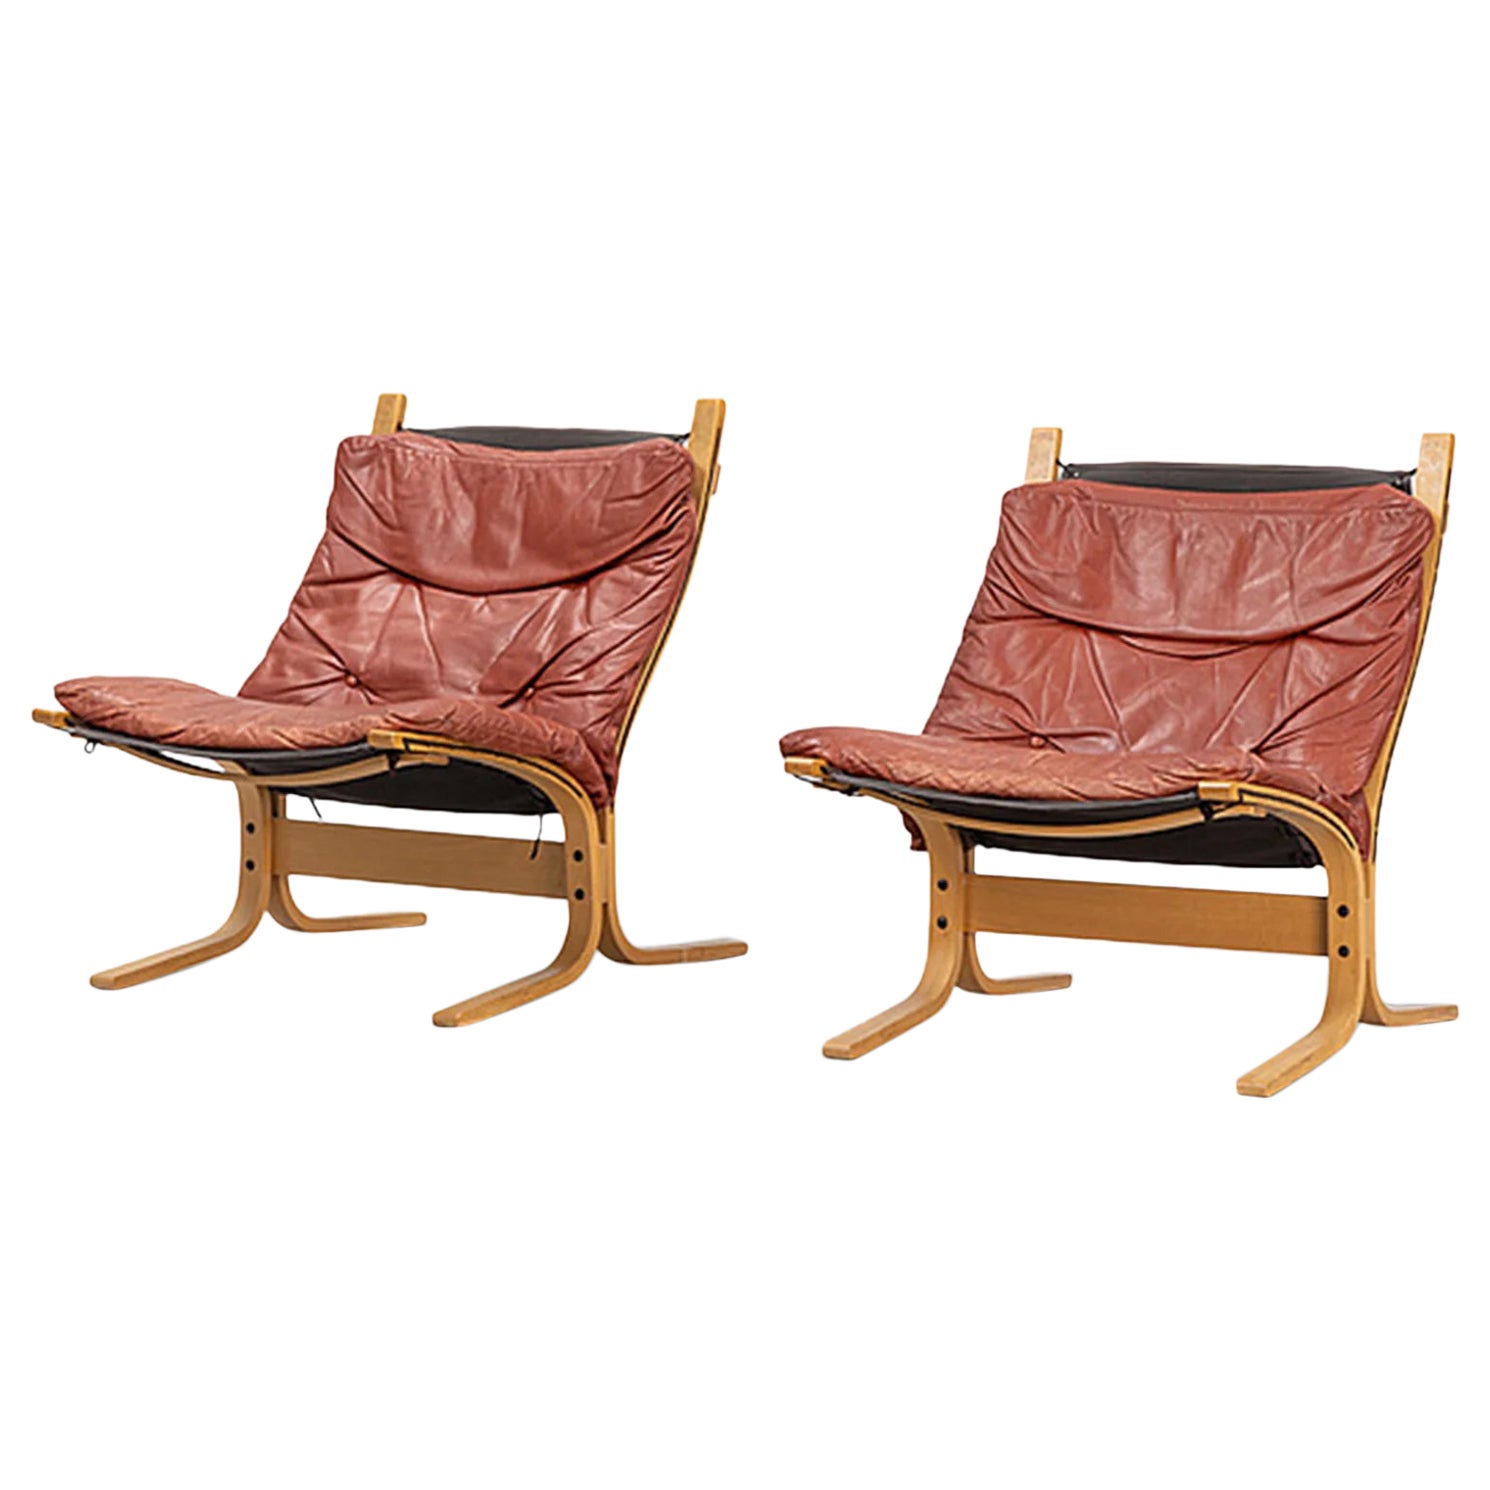 Pair of lowback "Siesta" lounge chairs in rust toned leather + beech